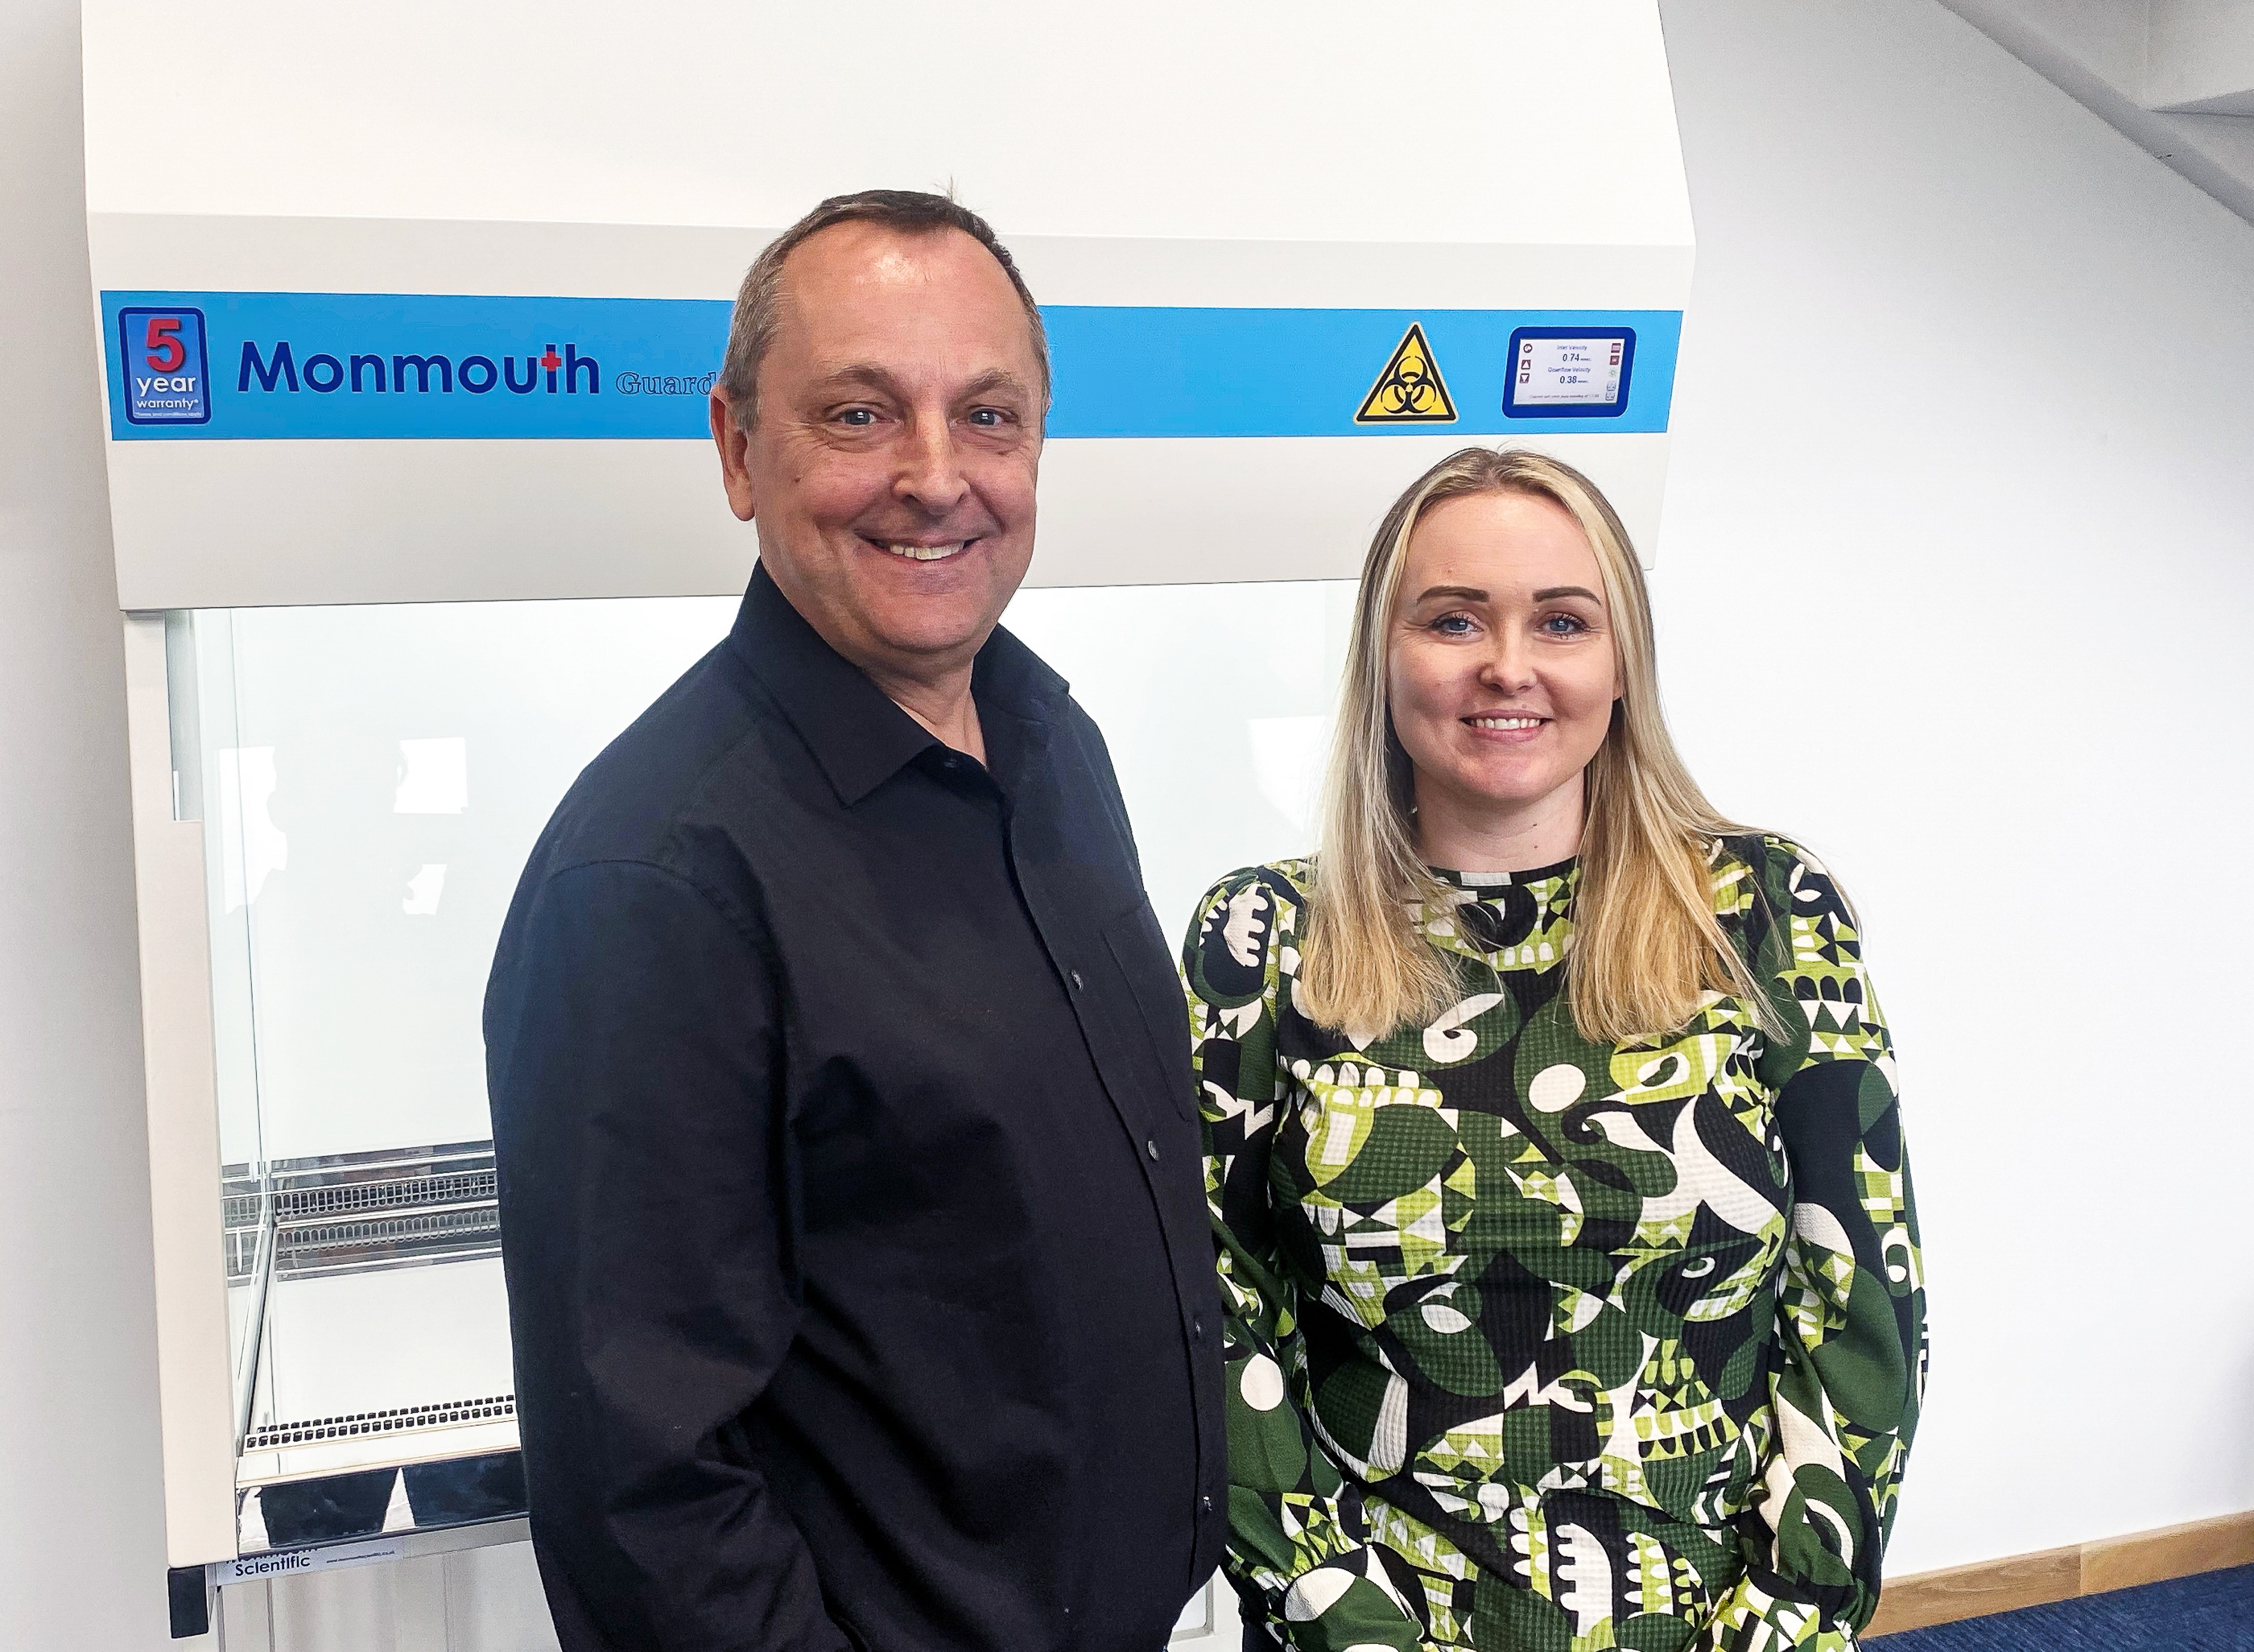 Monmouth Scientific's New Managing Director Julian Mussett (Left) and Finance Director Kimberley Lock (Right), begin work at the company’s headquarters in Bridgwater, Somerset